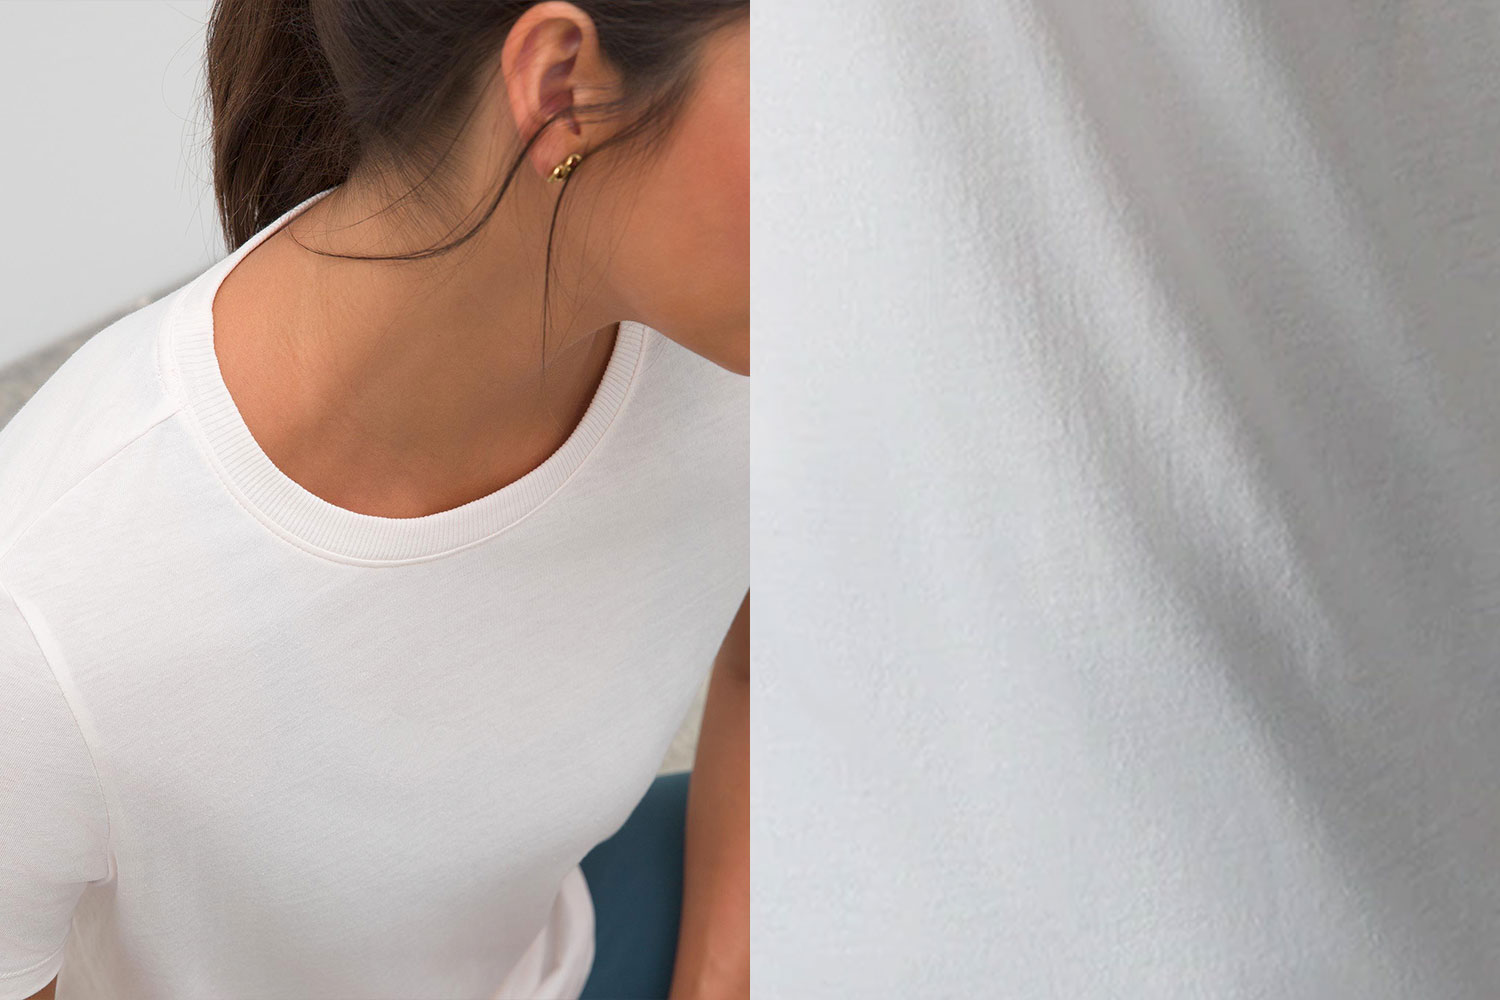 Soma women's model wearing a white pima cotton fabric T-shirt next to a close-up of the clothing fabric type.